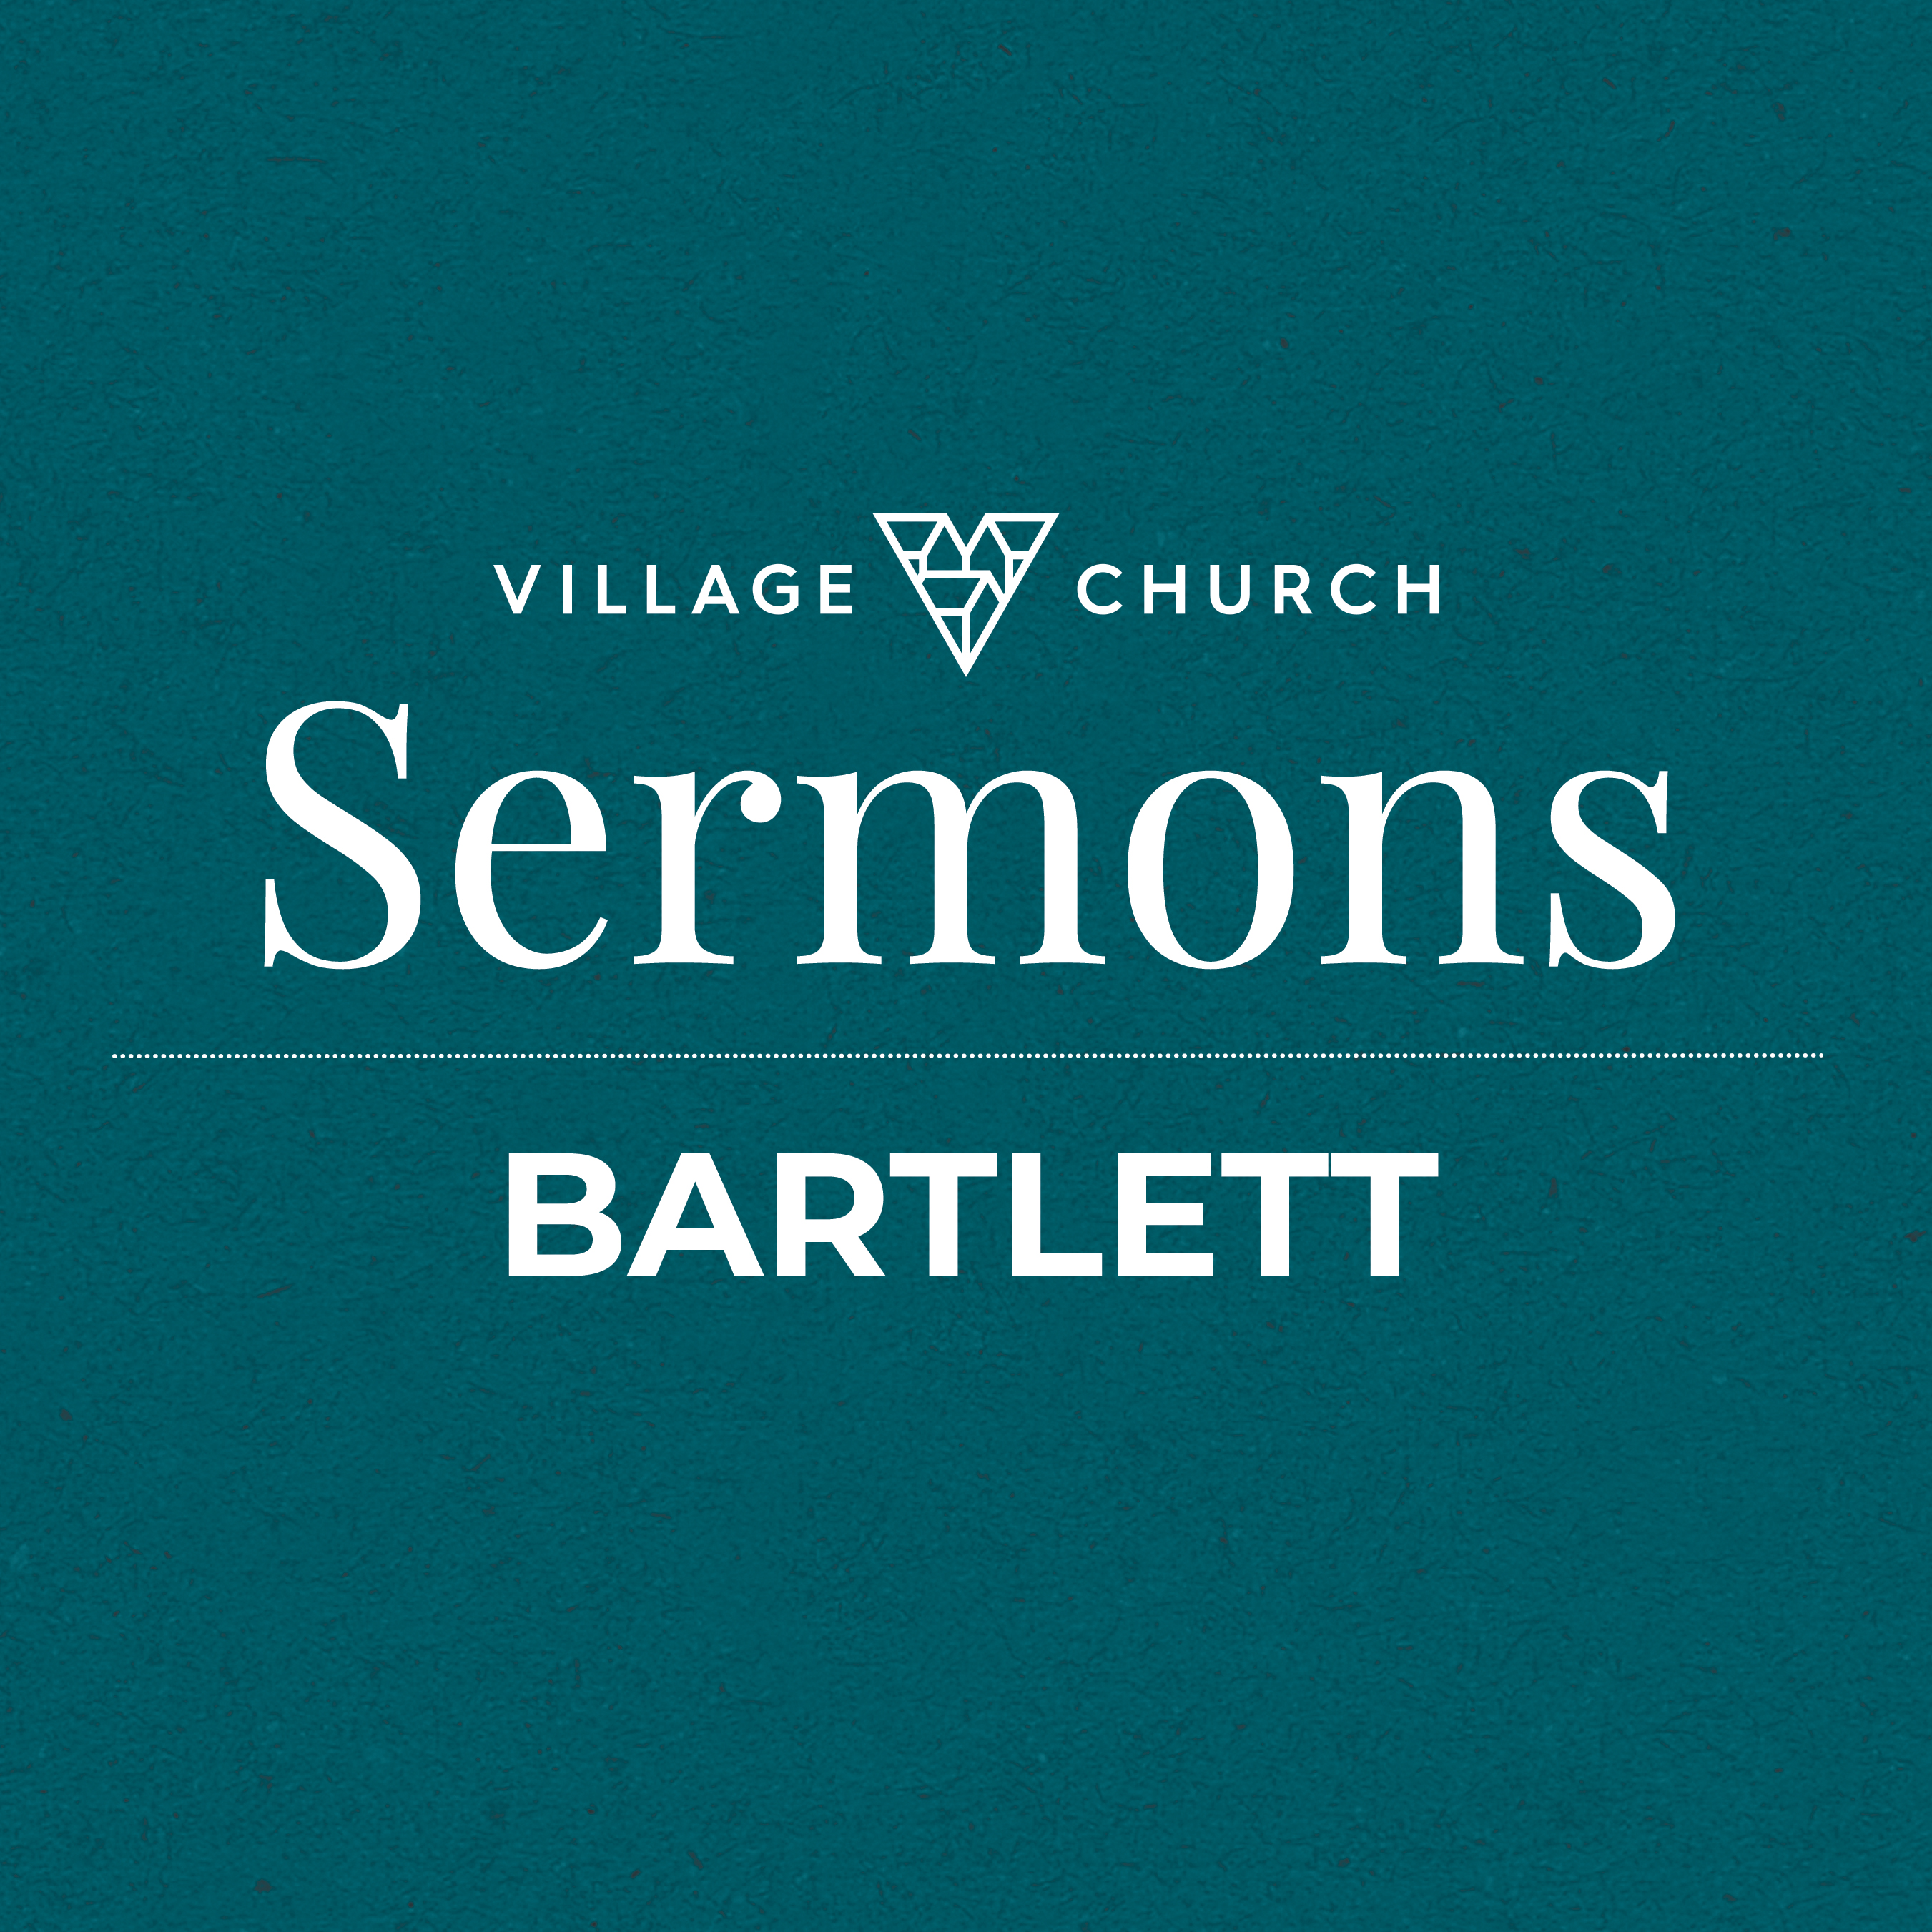 Sermon Q&A: Will we see the Father or the Spirit on the New Earth?